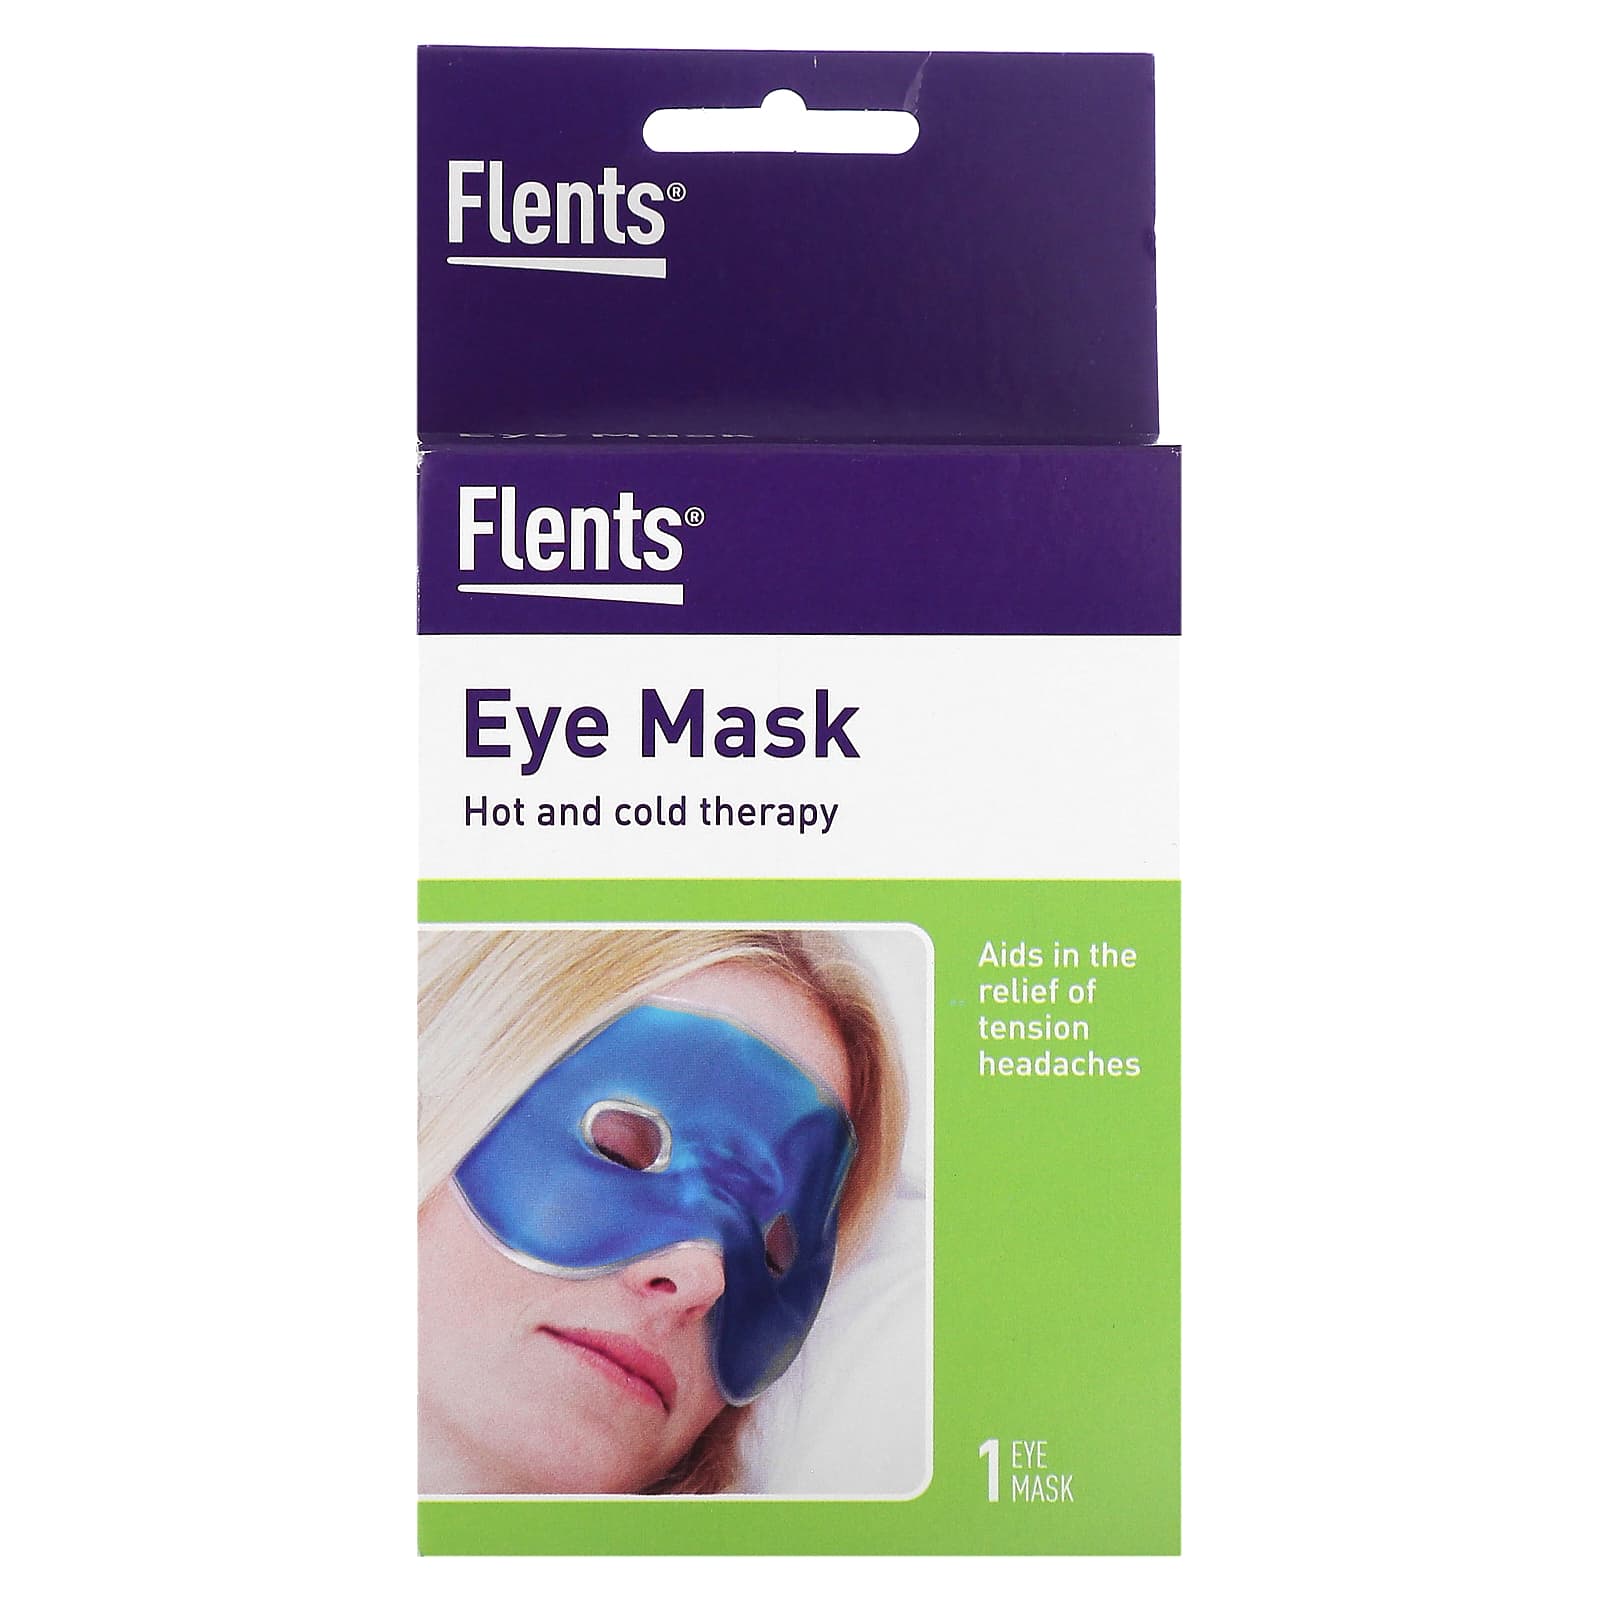 Flents-Eye Mask-Hot and Cold Therapy-1 Mask